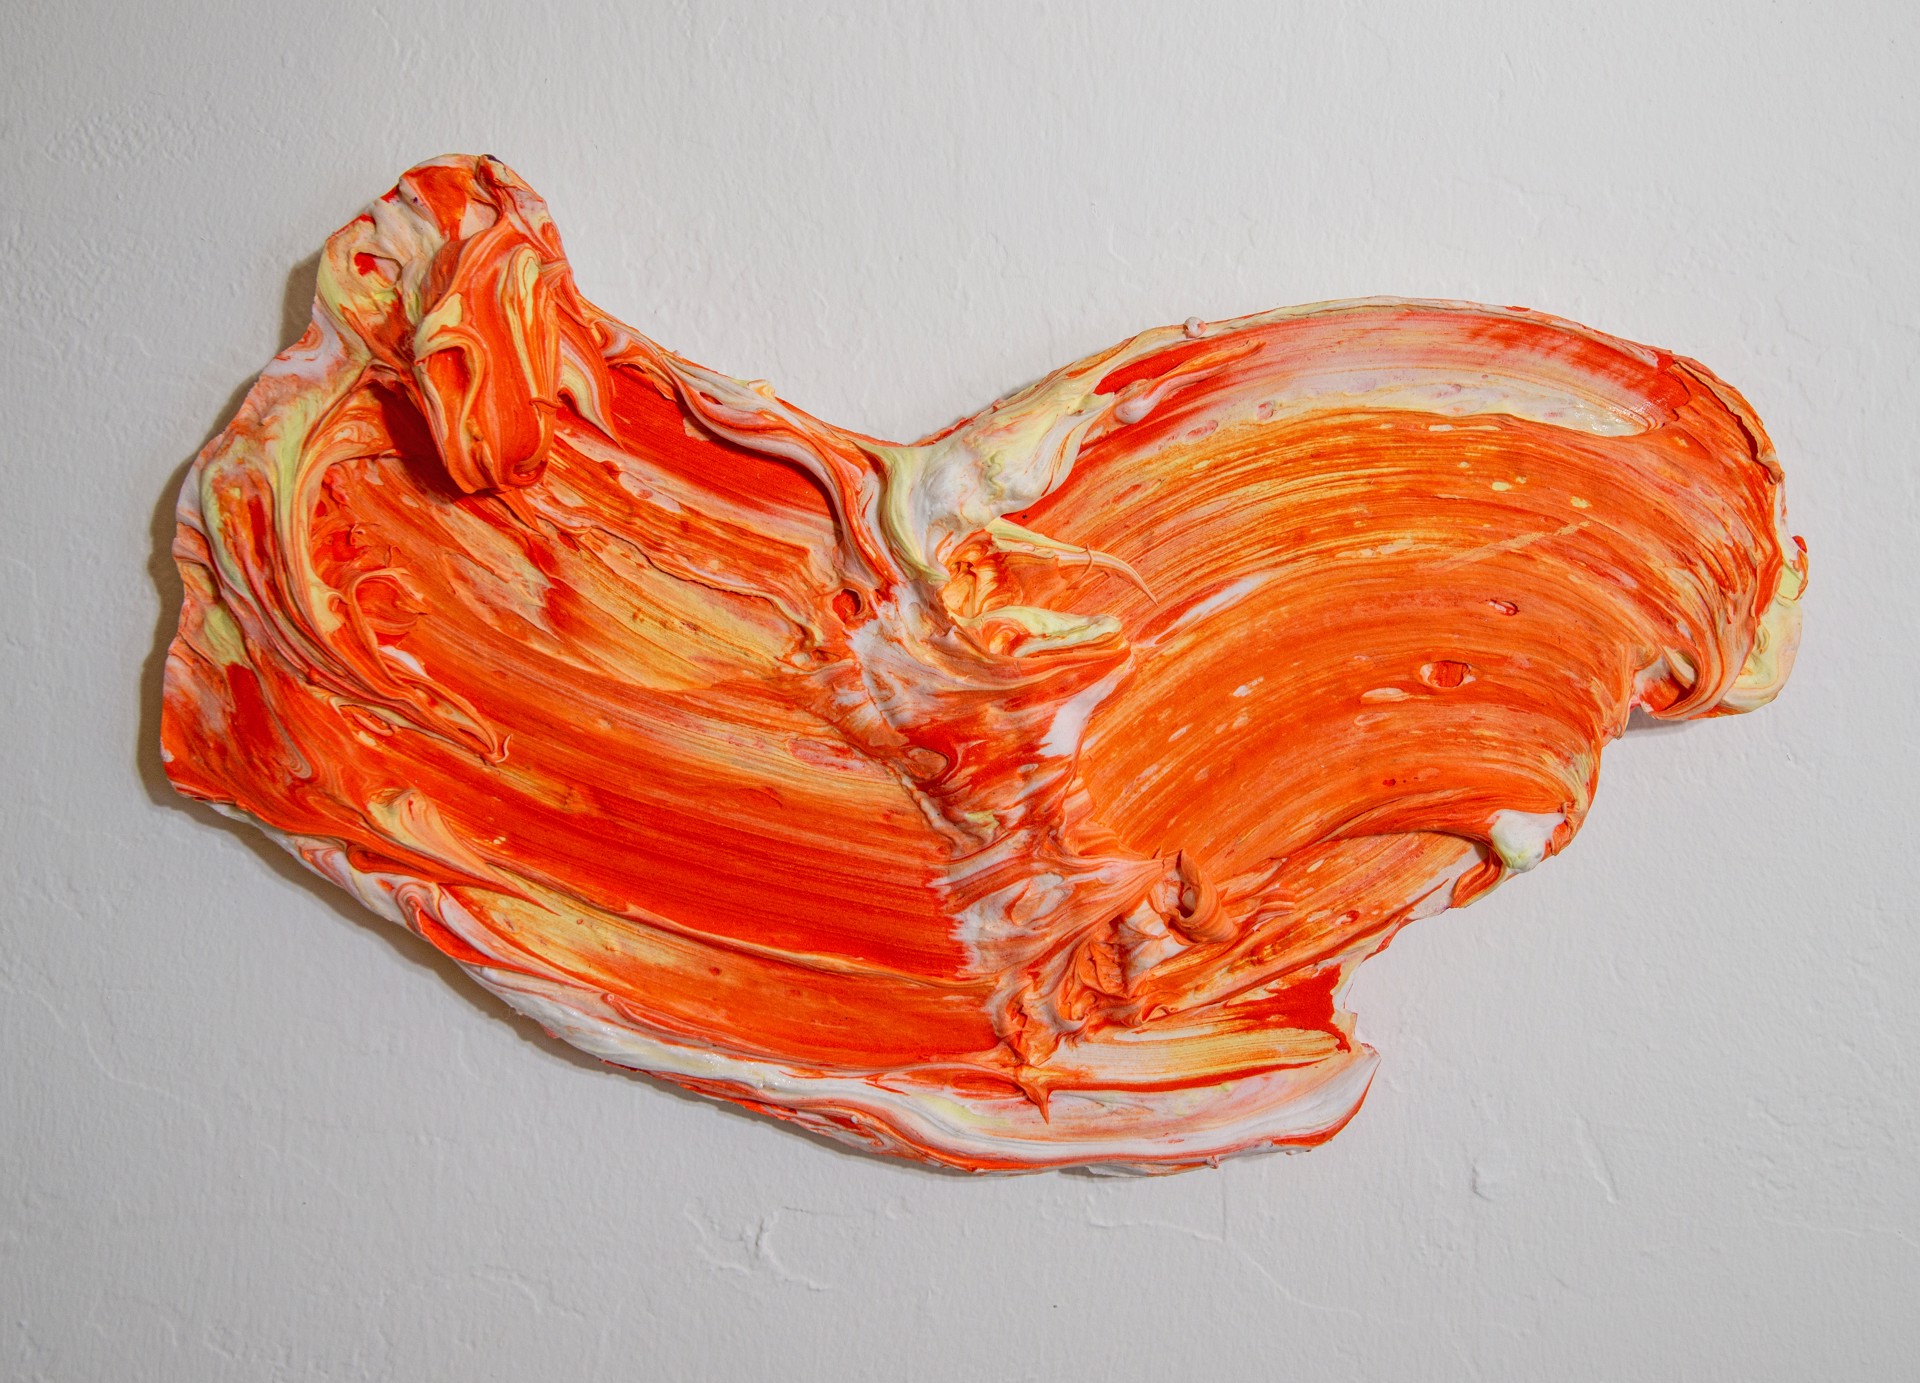 Study for Hyco by Donald Martiny